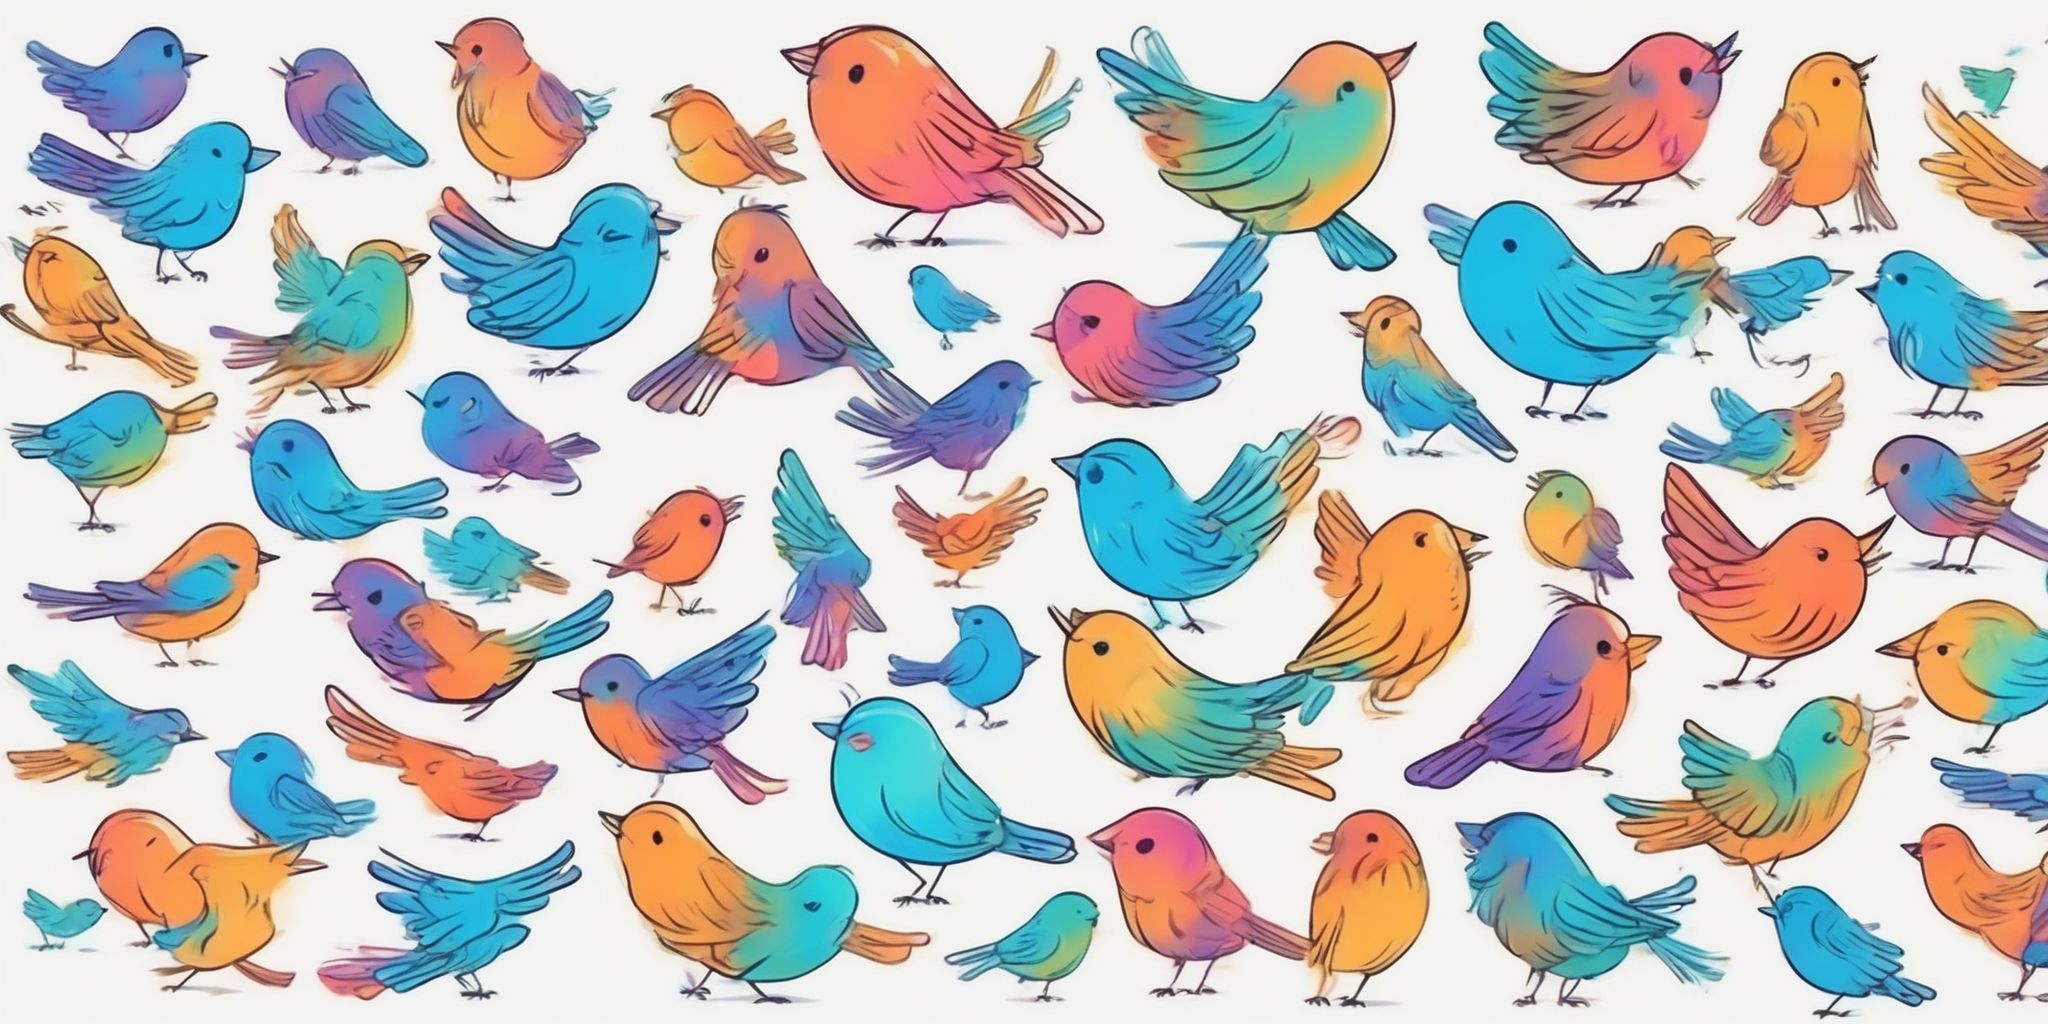 tweets in illustration style with gradients and white background